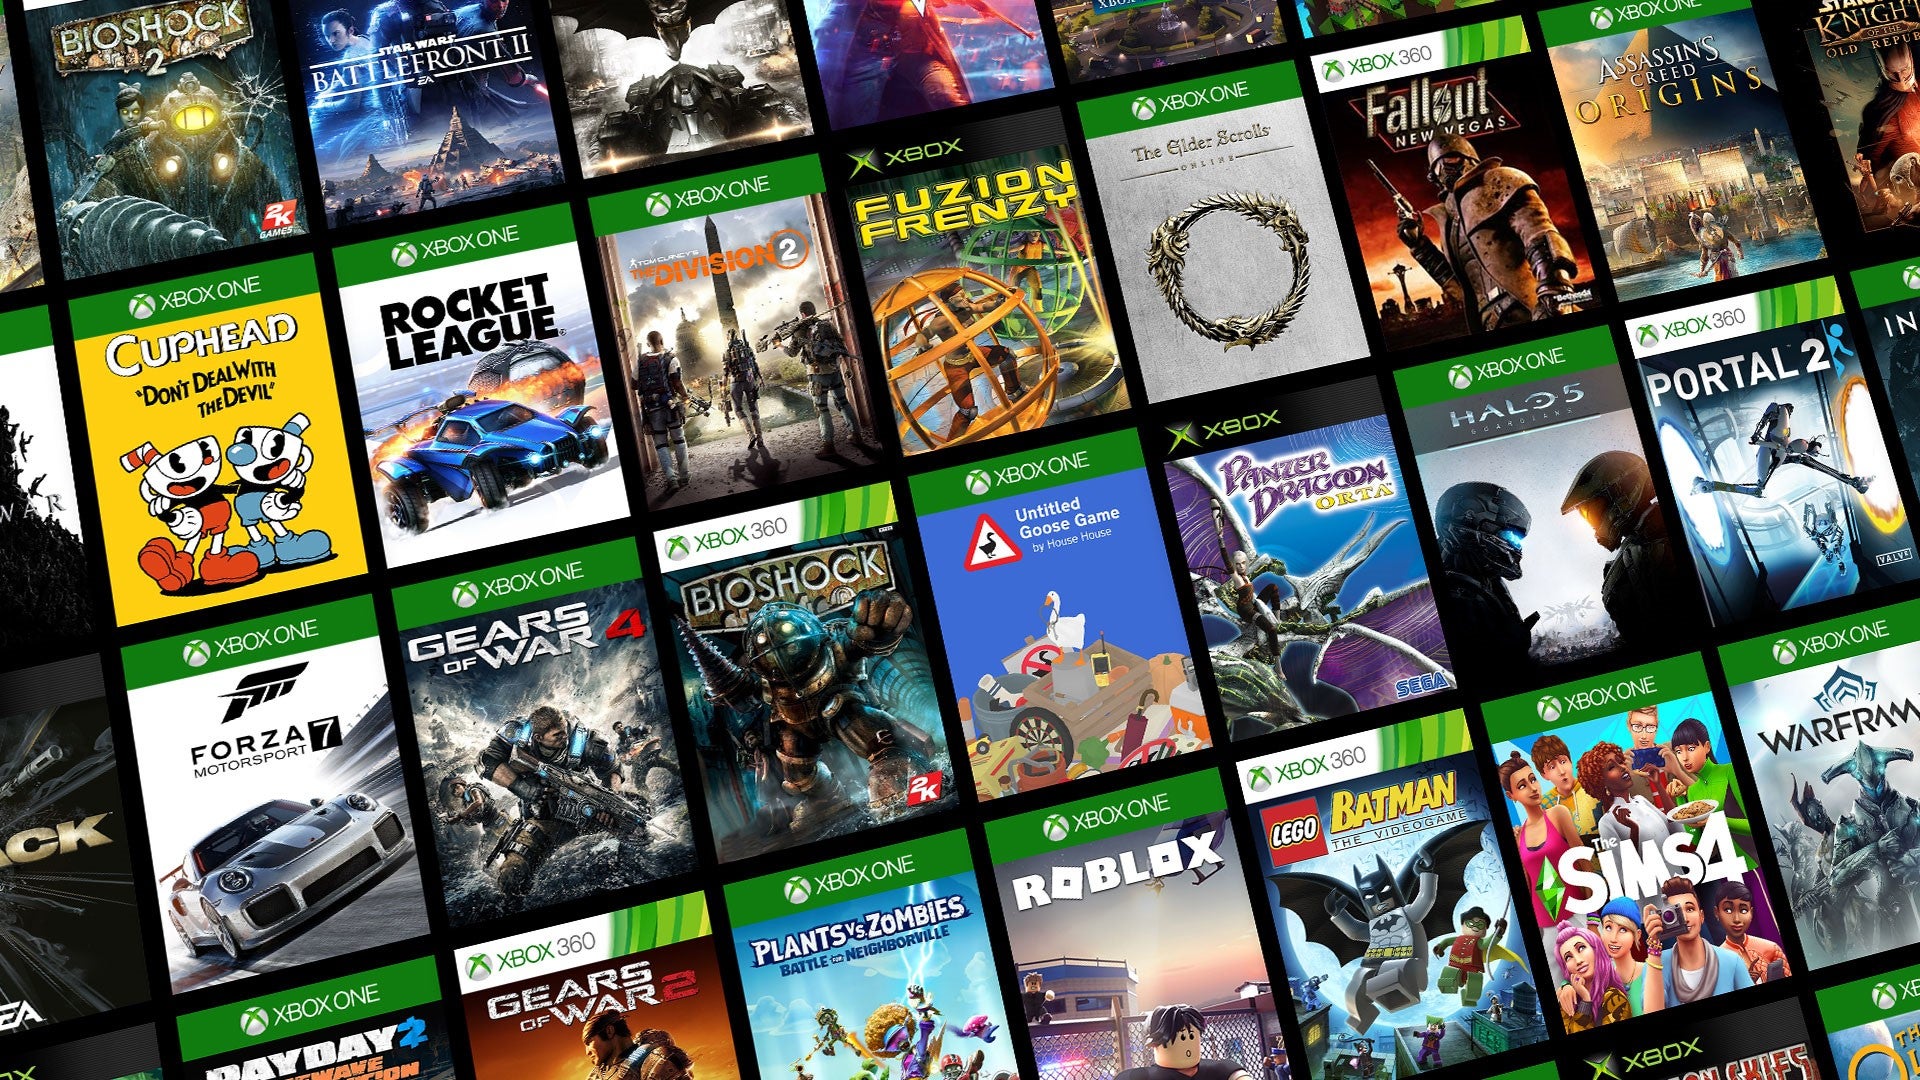 Microsoft has removed online DRM checks for Xbox One discs on Series X